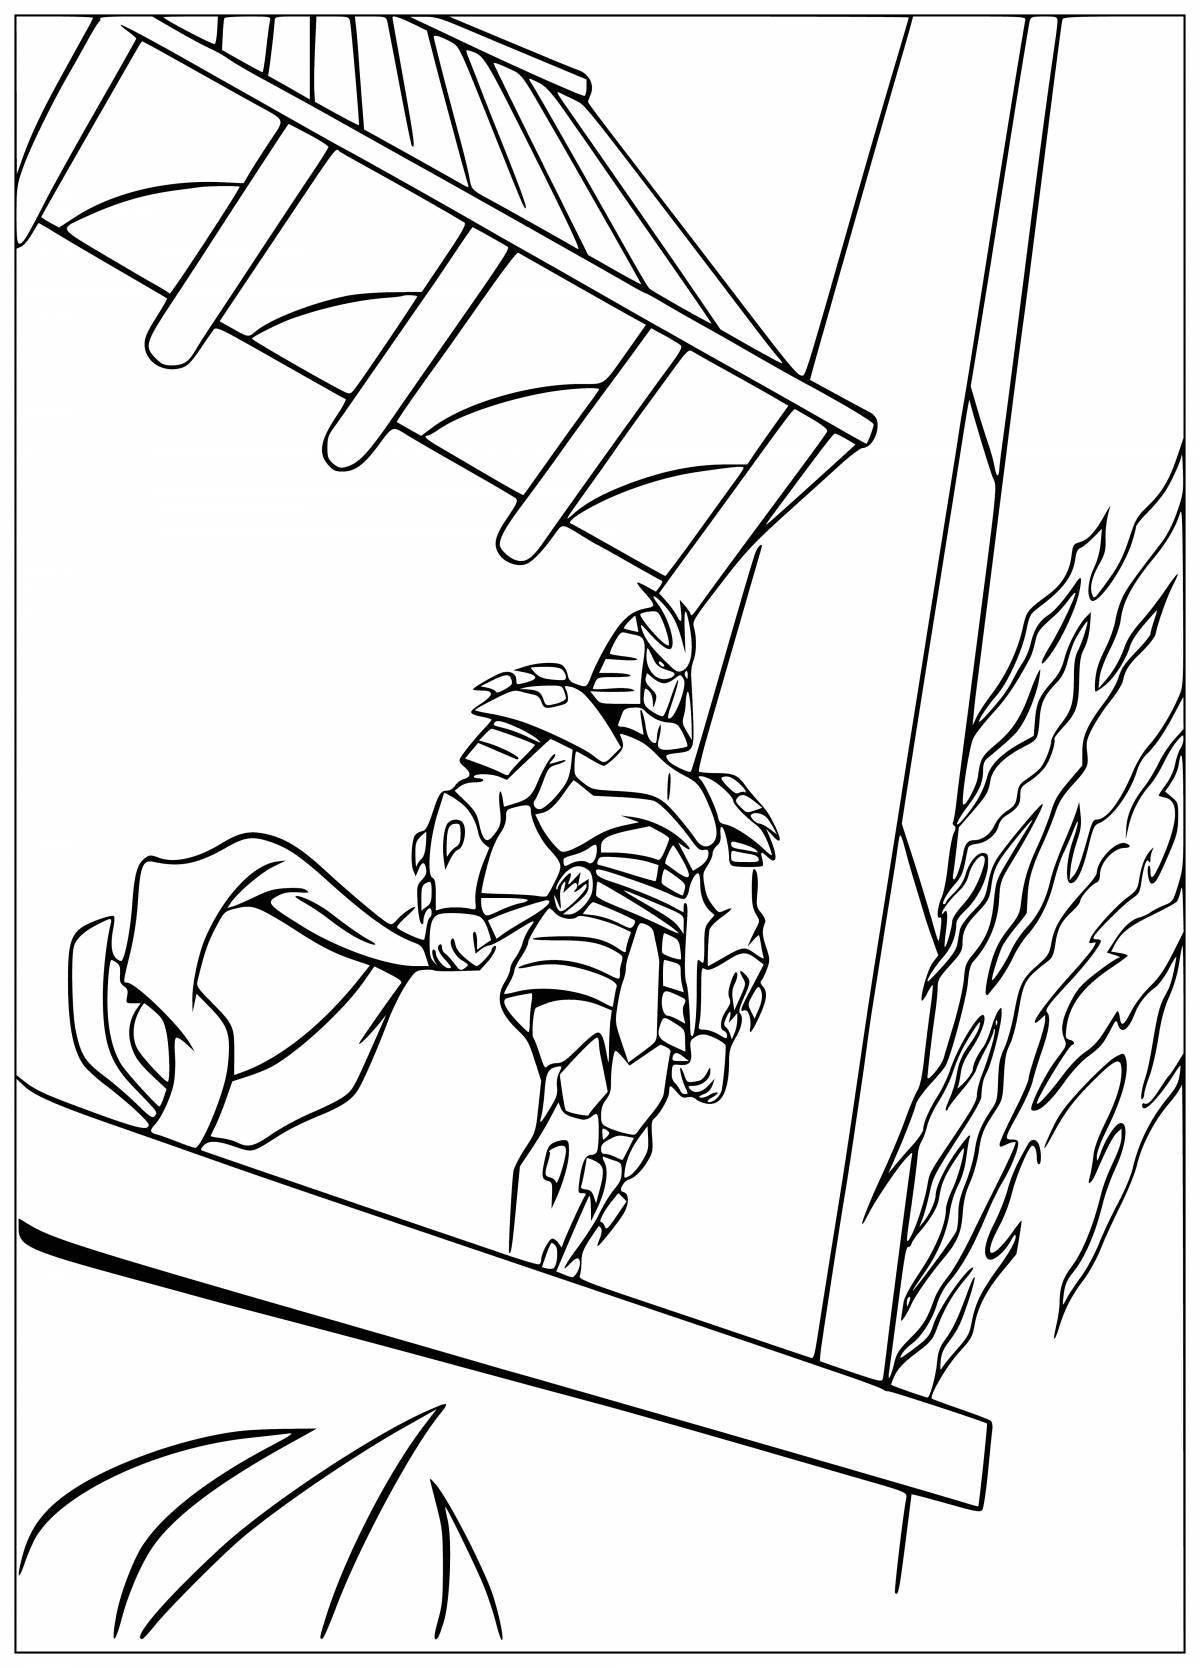 Colorful shredder coloring page